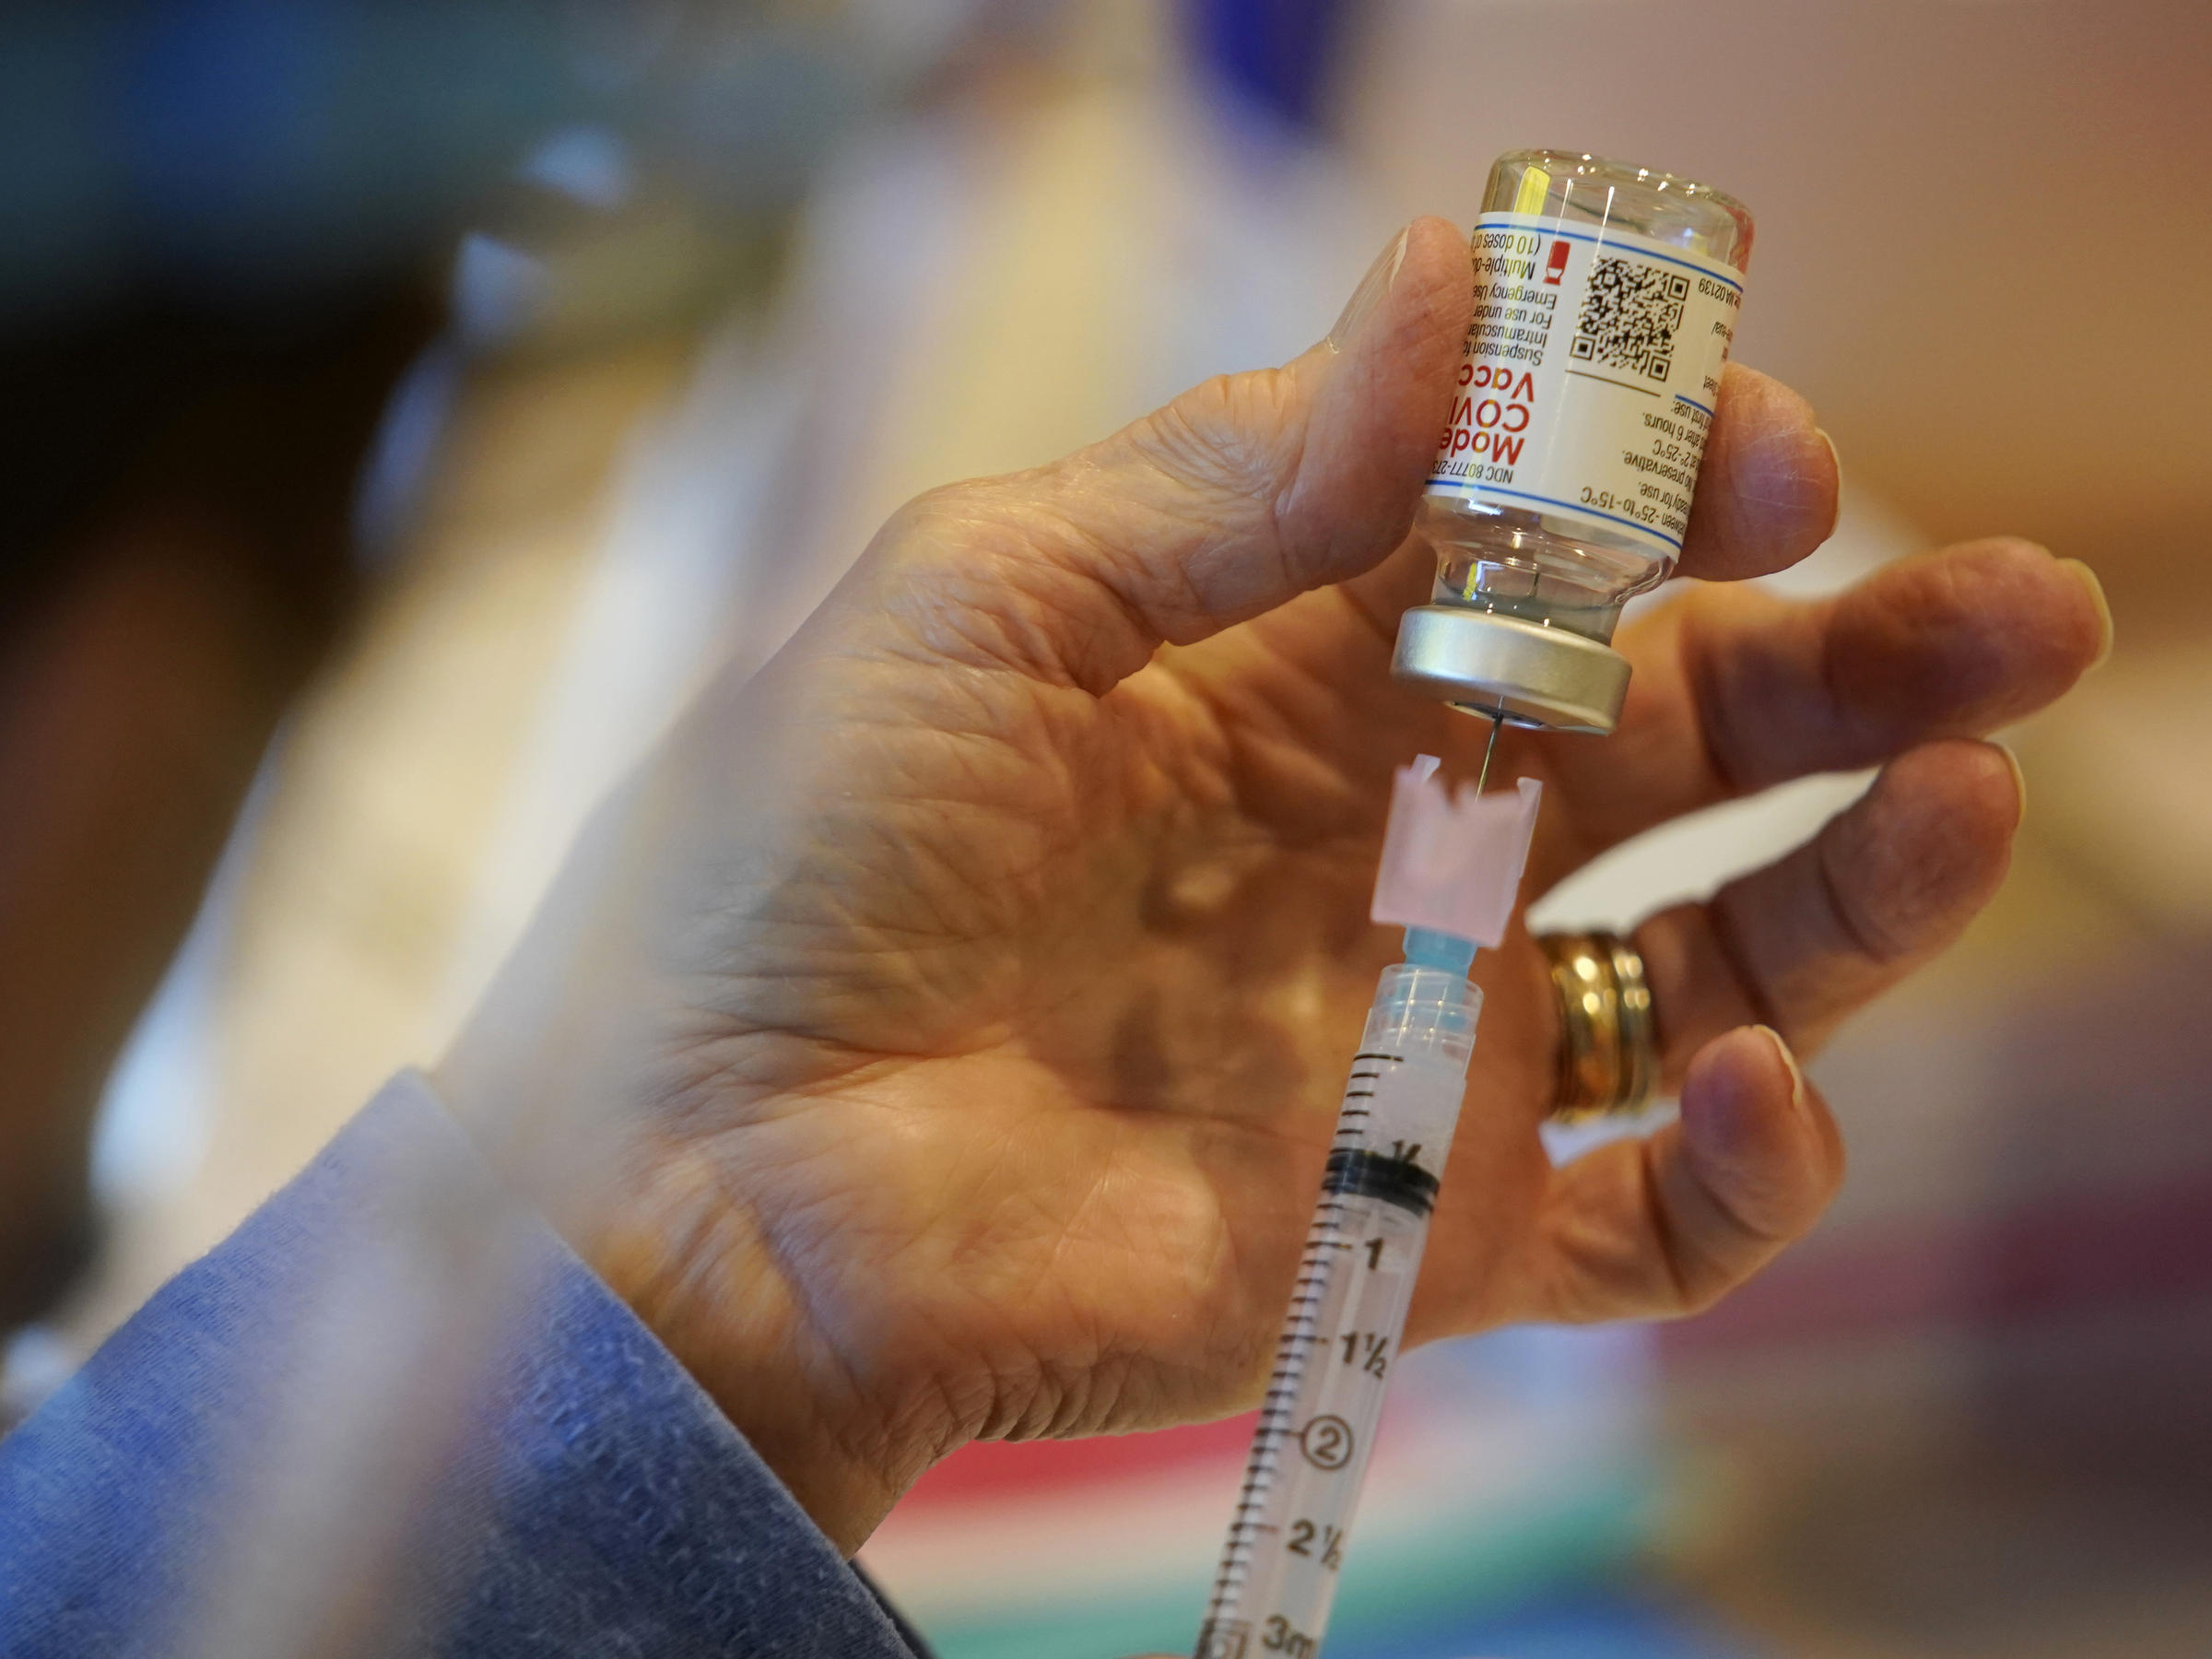 Pharmacist who tried to destroy Covid vaccine thought it was unsafe